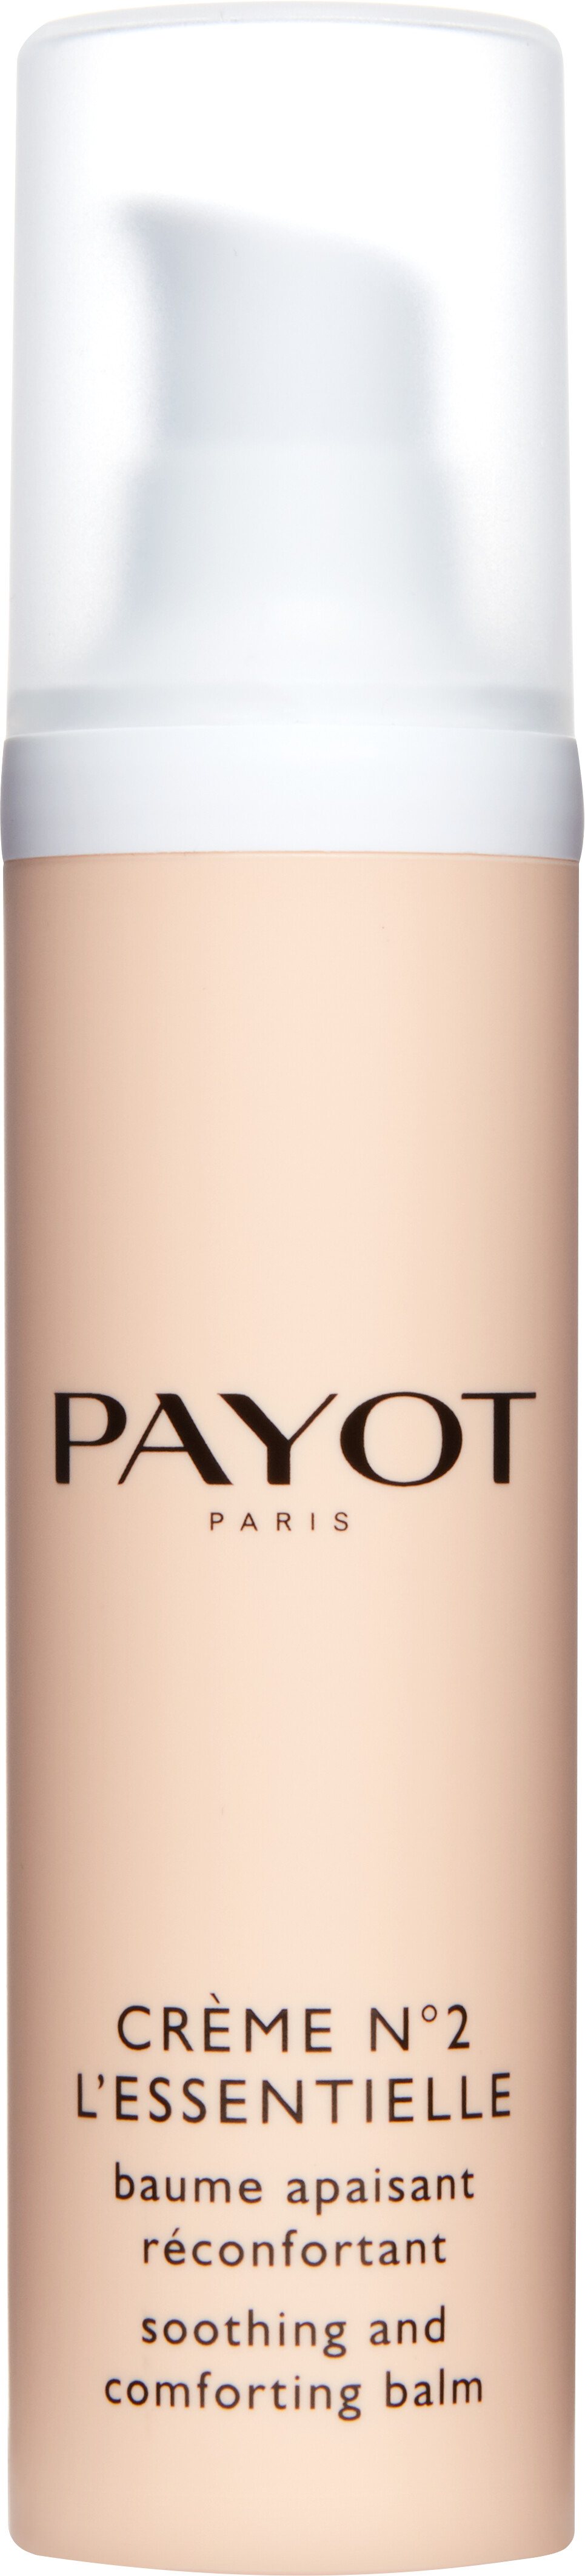 PAYOT Creme Ndeg2 L'Essentielle Soothing and Comforting Balm 40ml